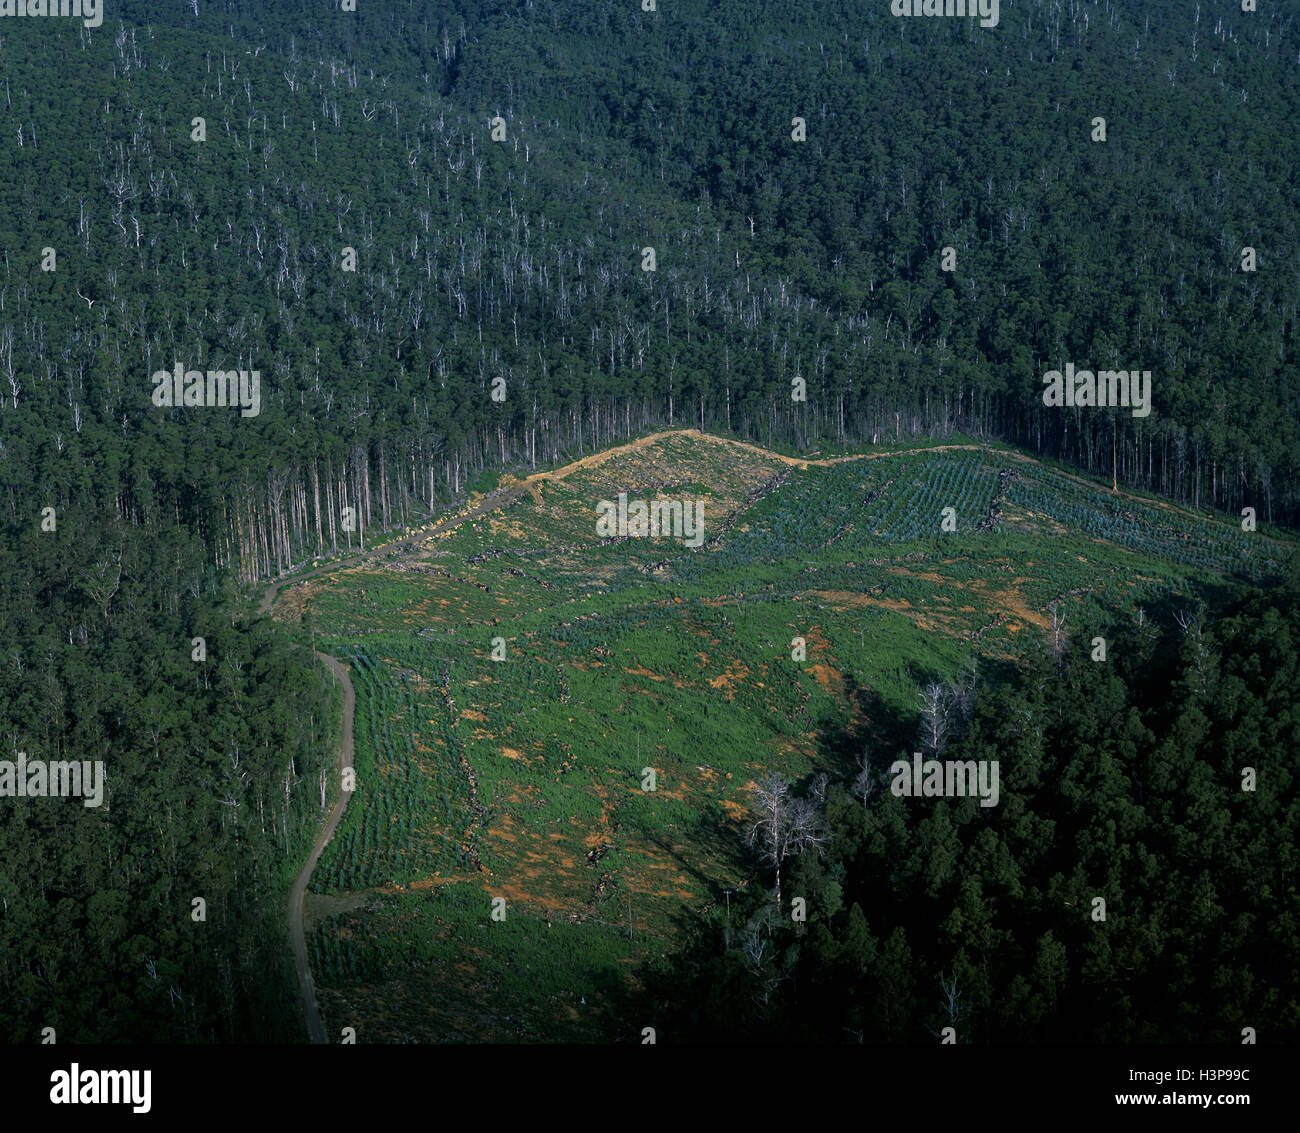 Logging industry: native eucalypt forest cleared for pine plantation, Stock Photo